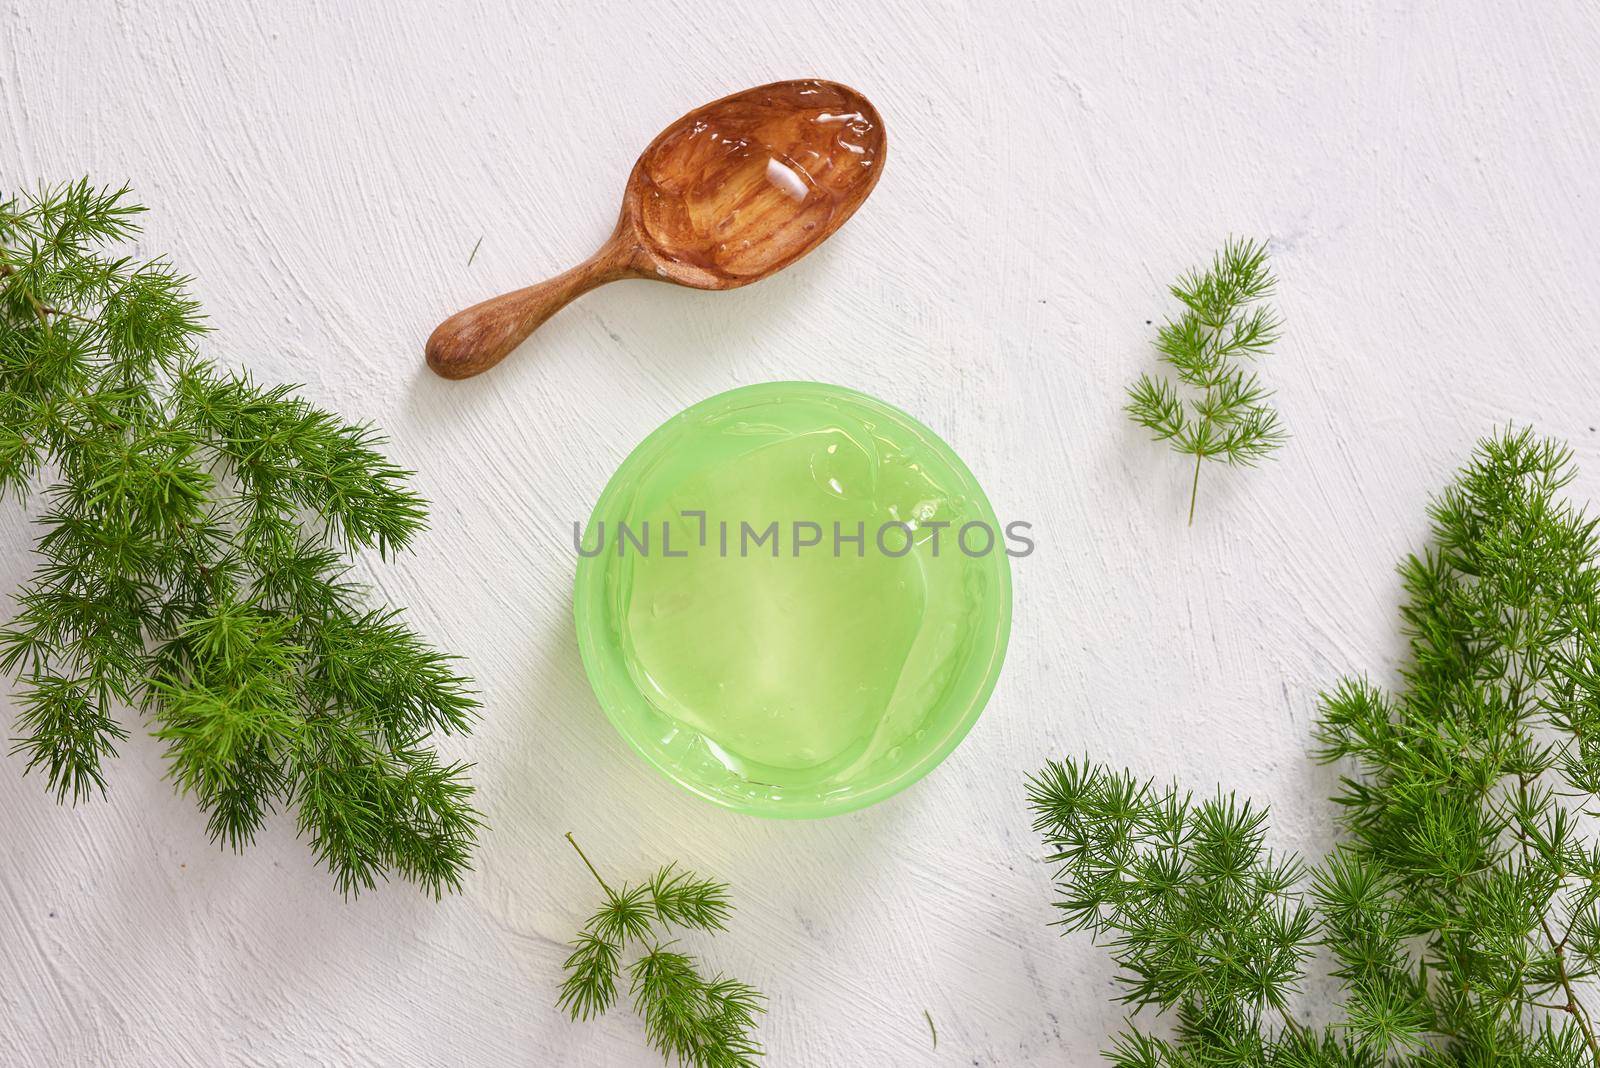 cosmetic creams with leaves on white wooden table background